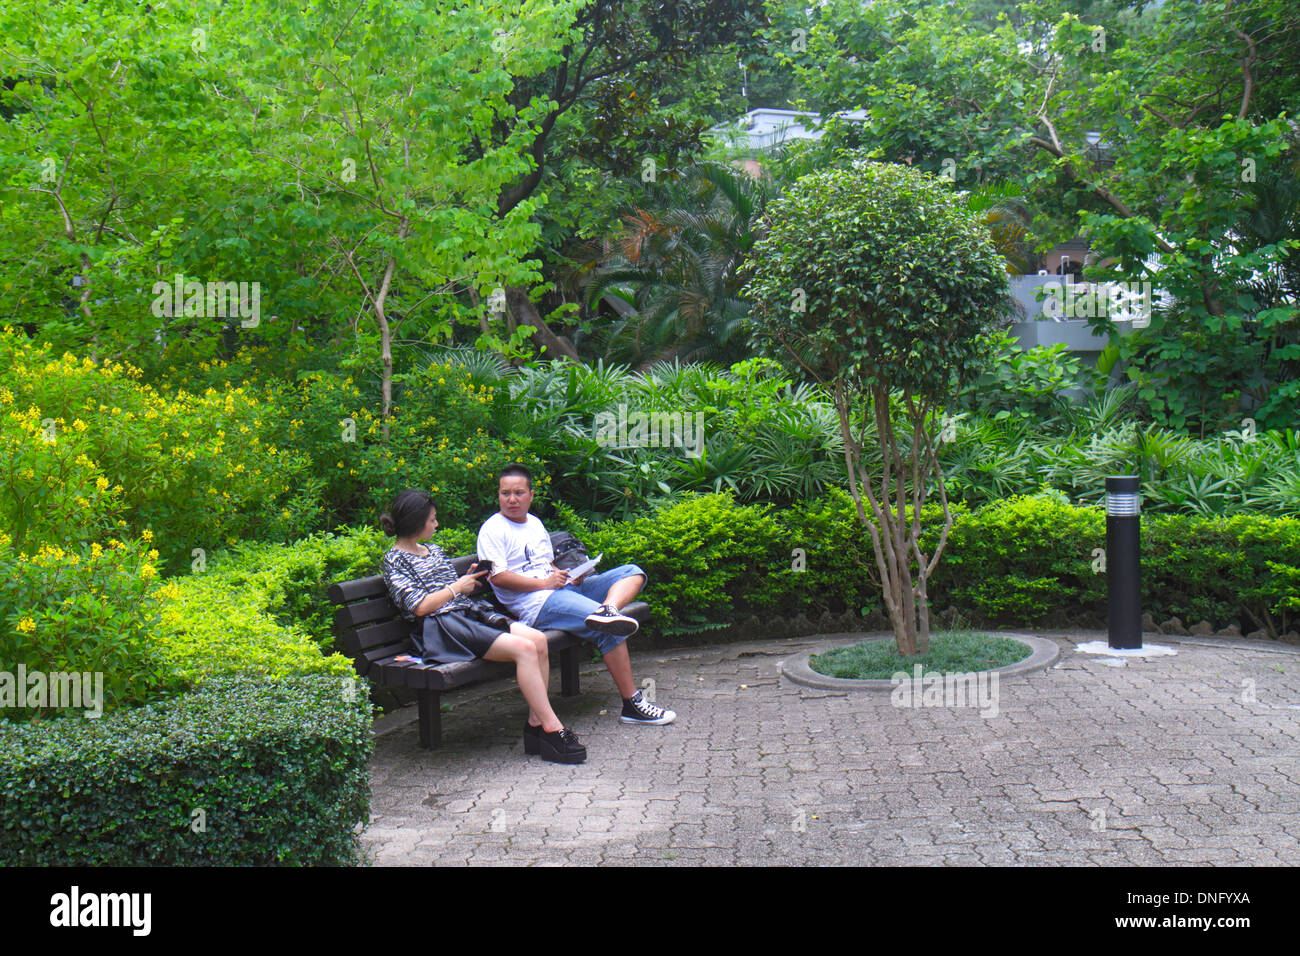 Hong Kong China,HK,Asia,Chinese,Oriental,Island,Central,Hong Kong Park,landscape,trees,bench,Asian man men male,adult,adults,woman female women,couple Stock Photo